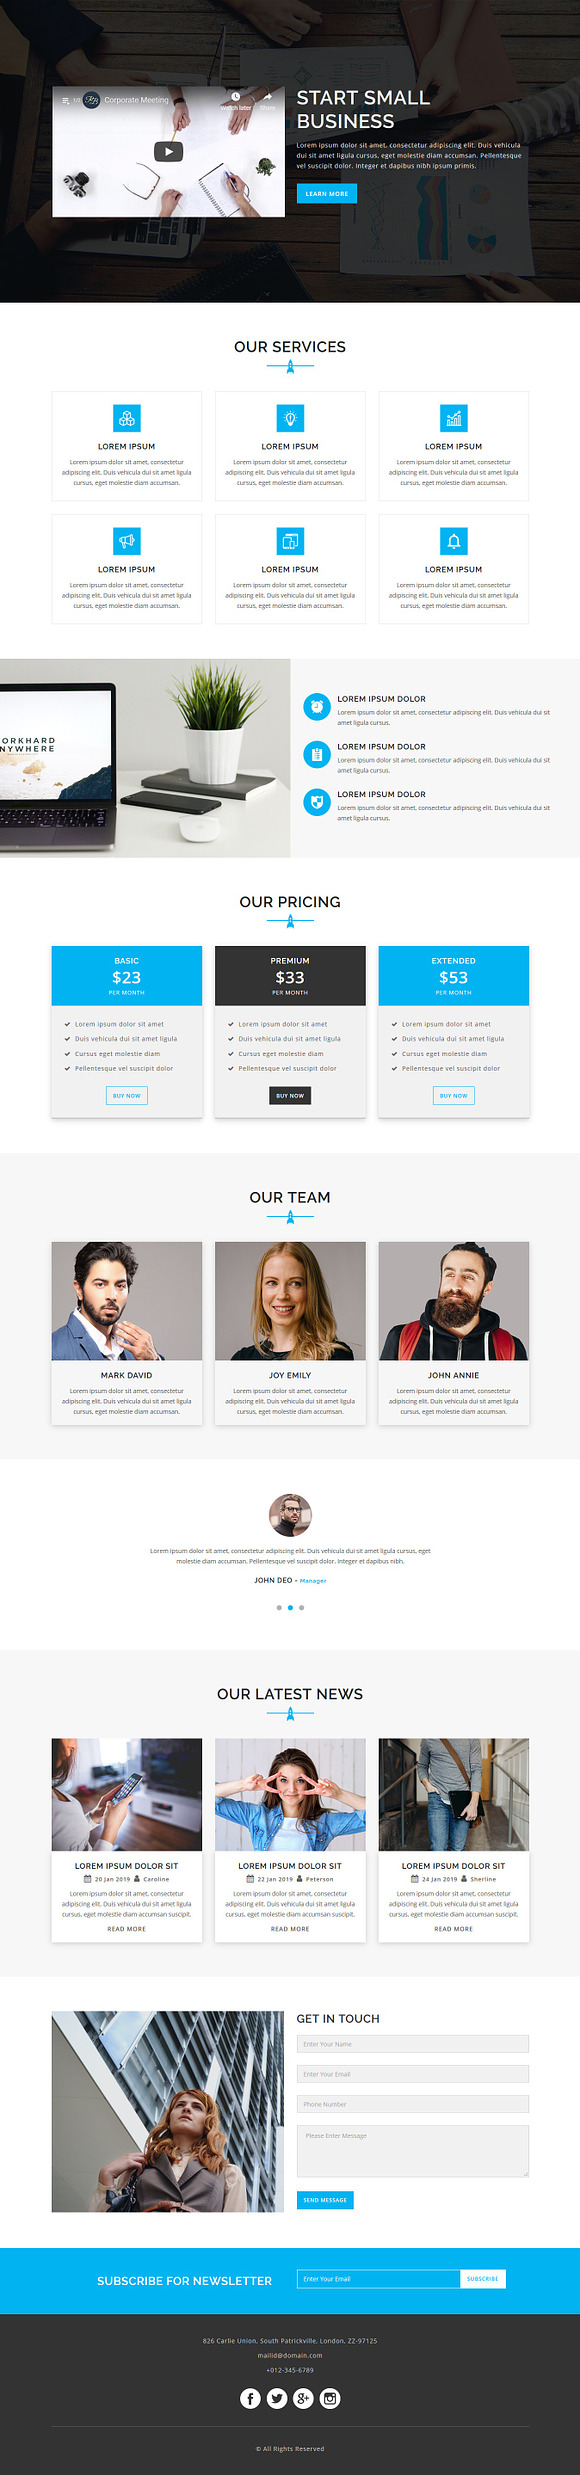 iStart -Responsive HTML Landing Page in Bootstrap Themes - product preview 2